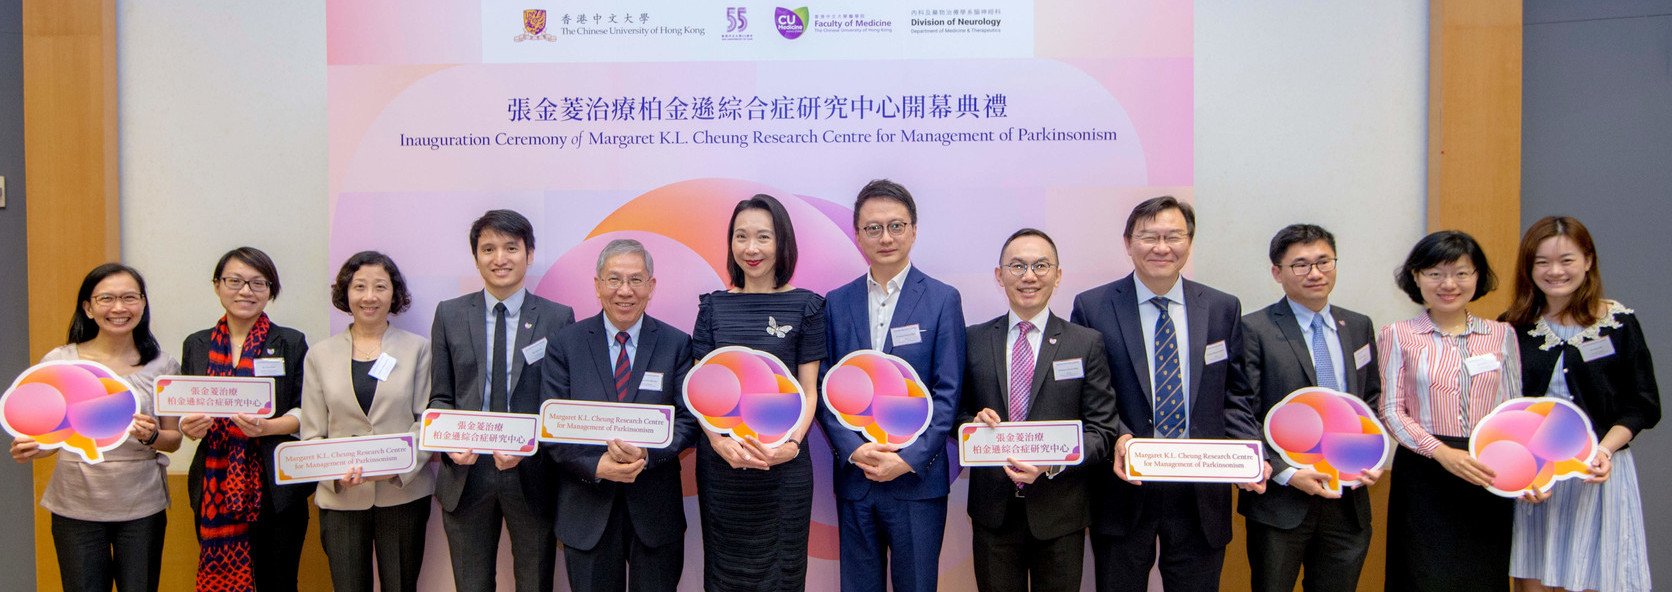 With a generous donation from Ms. Margaret Kam Ling CHEUNG (6th from left), the Faculty of Medicine at CUHK sets up the Margaret K.L. Cheung Research Centre for Management of Parkinsonism on the World Parkinson’s Day (11 April). 